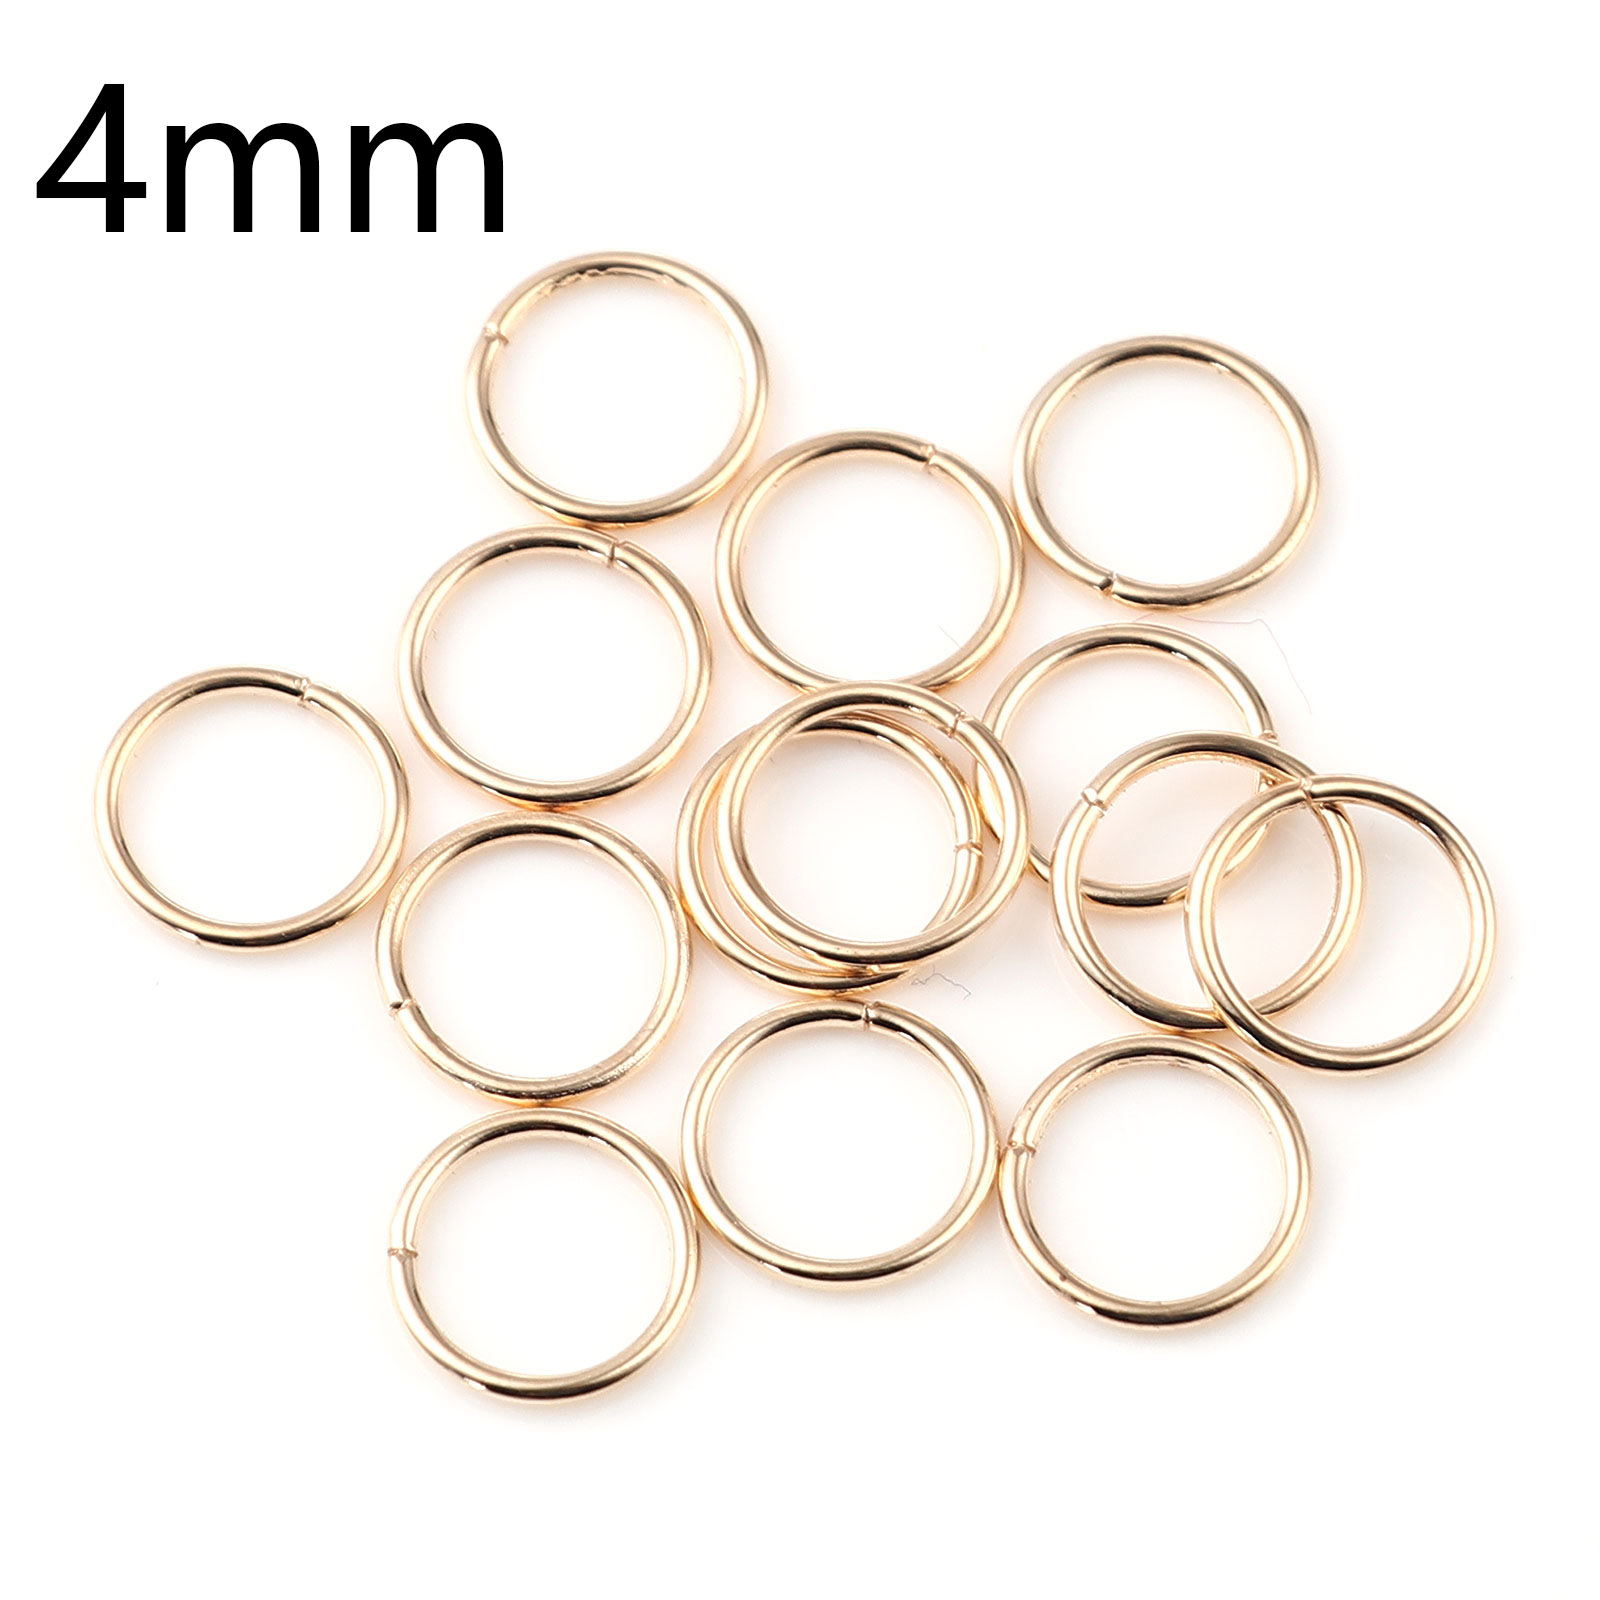 Picture of 0.7mm Iron Based Alloy Open Jump Rings Findings Circle Ring KC Gold Plated 4mm Dia, 200 PCs